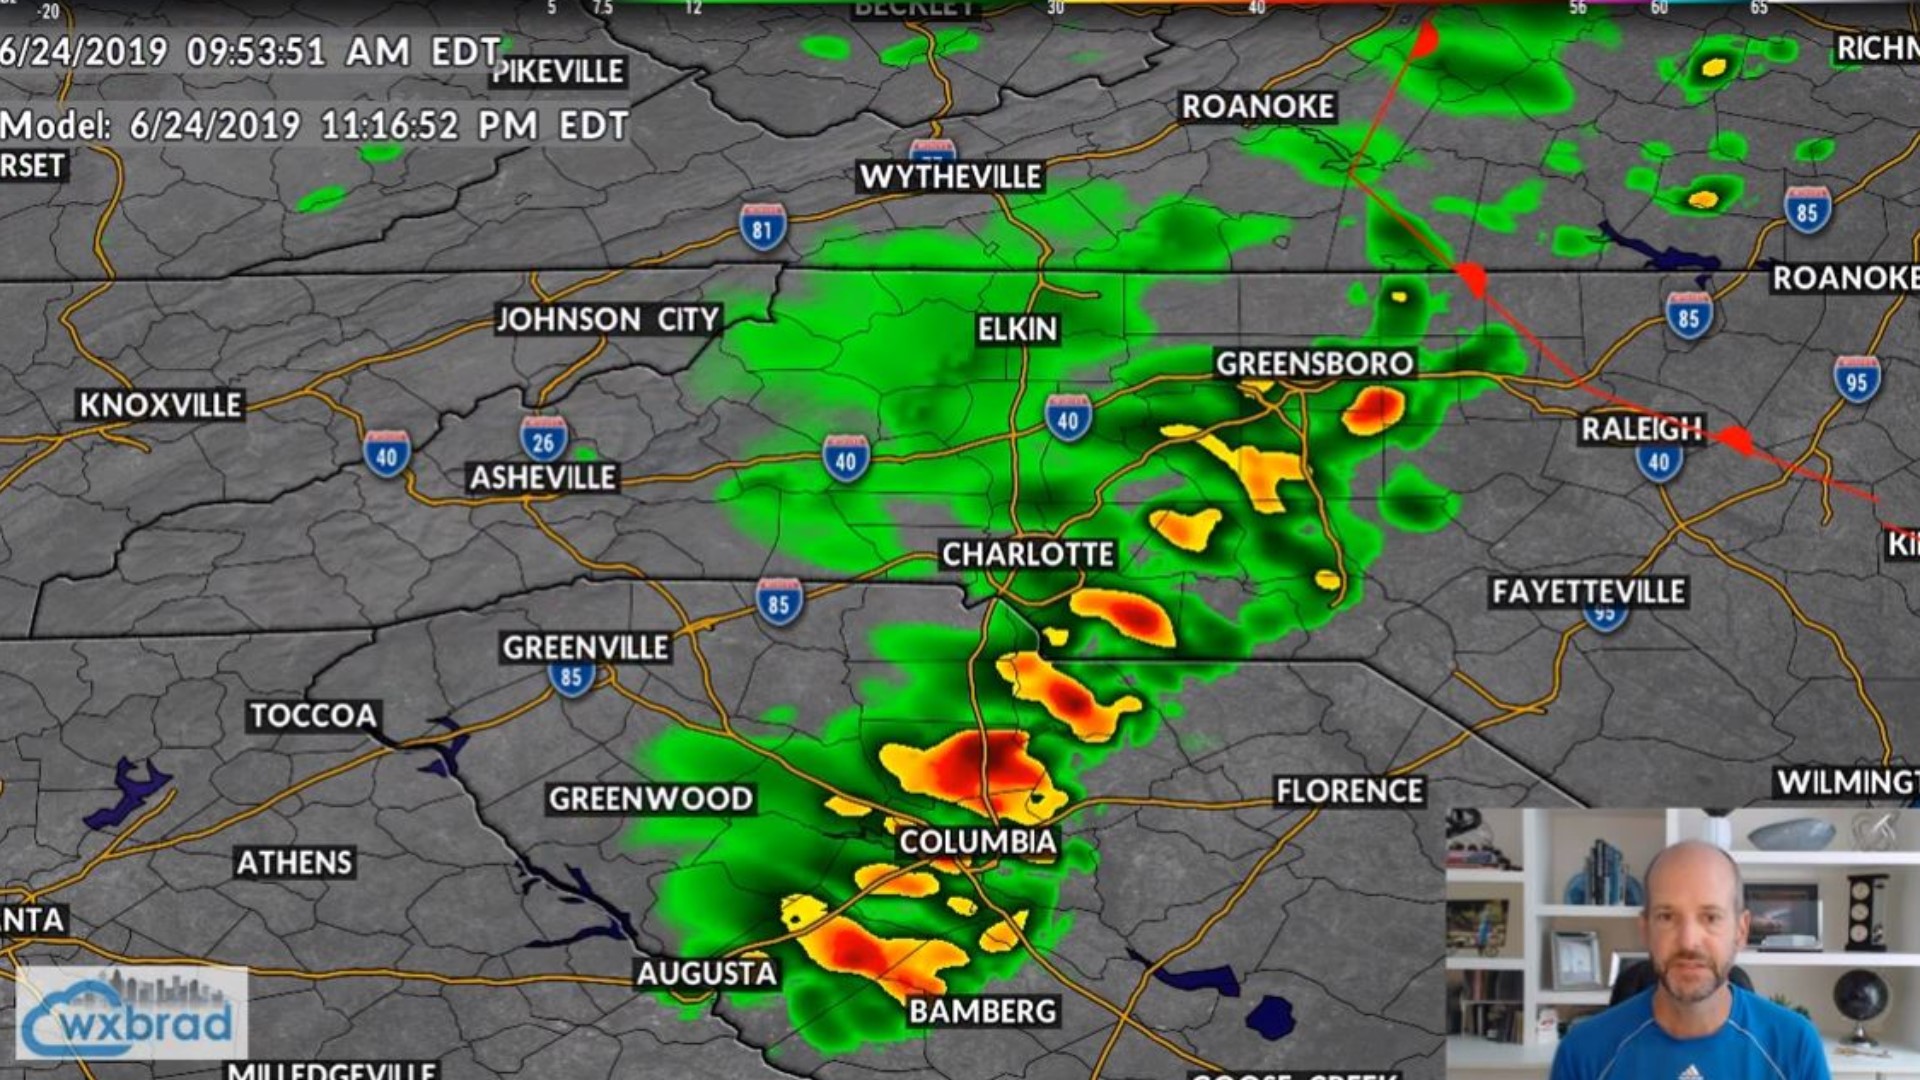 Monday WX VLOG 6/24/2019: Brad Panovich says strong to severe storms are possible by this evening. Some storms could have damaging straight-line winds and brief heavy rainfall in the Charlotte-area.